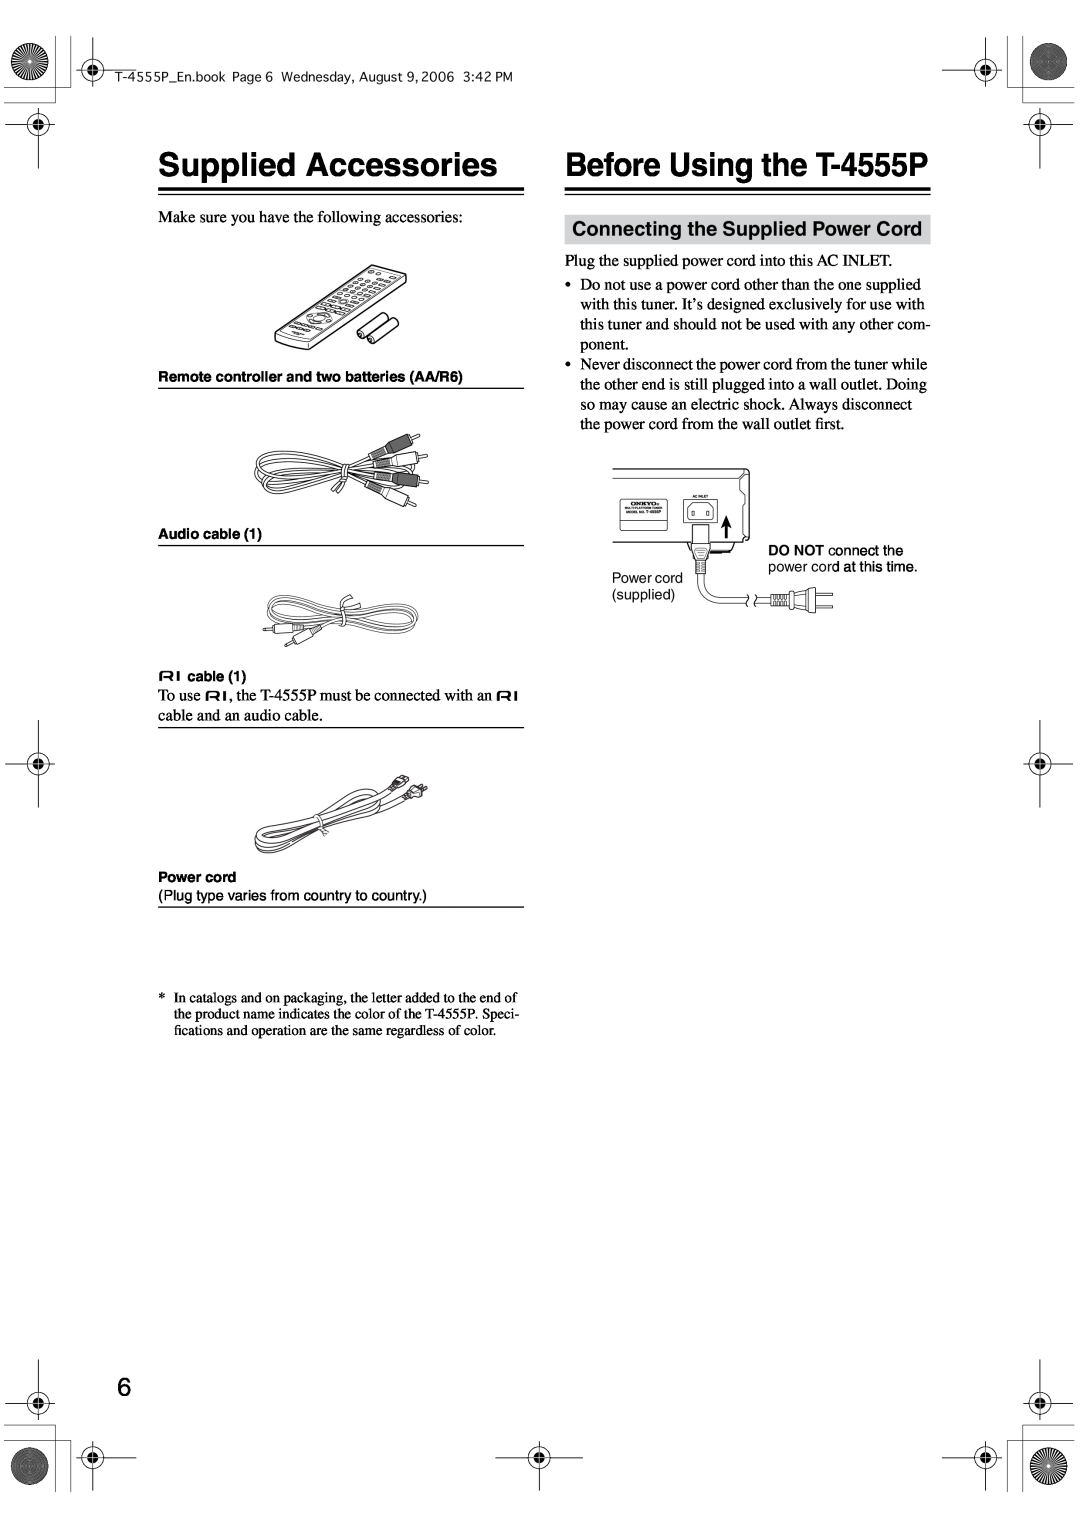 Onkyo instruction manual Supplied Accessories, Before Using the T-4555P, Connecting the Supplied Power Cord 